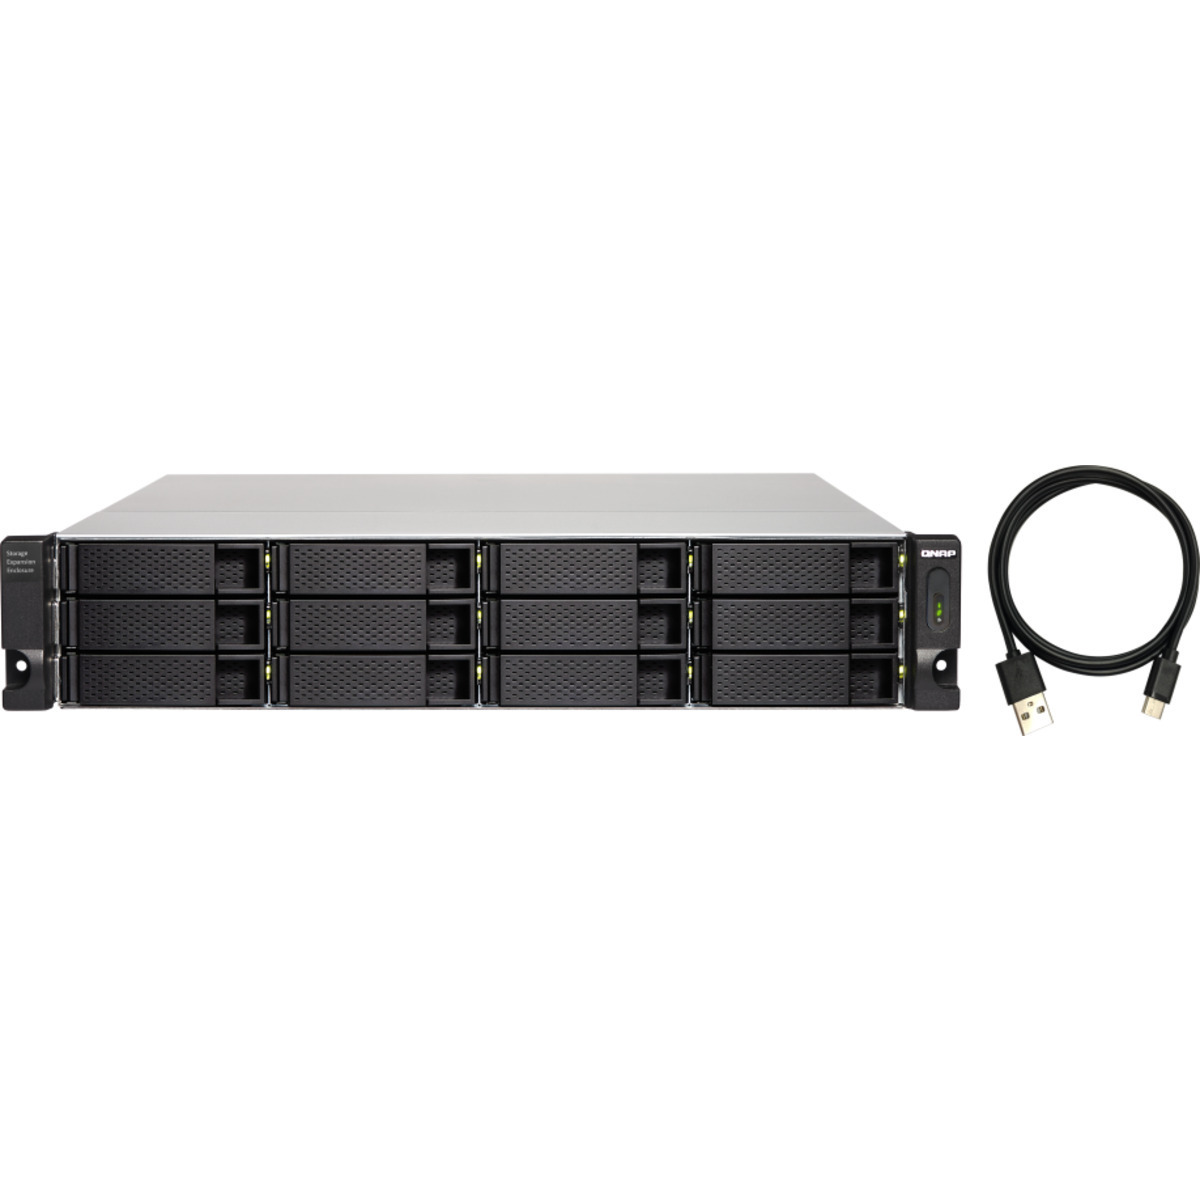 QNAP TL-R1200C-RP External Expansion Drive 162tb 12-Bay RackMount Multimedia / Power User / Business Expansion Enclosure 9x18tb Western Digital Ultrastar DC HC550 WUH721818ALE6L4 3.5 7200rpm SATA 6Gb/s HDD ENTERPRISE Class Drives Installed - Burn-In Tested TL-R1200C-RP External Expansion Drive